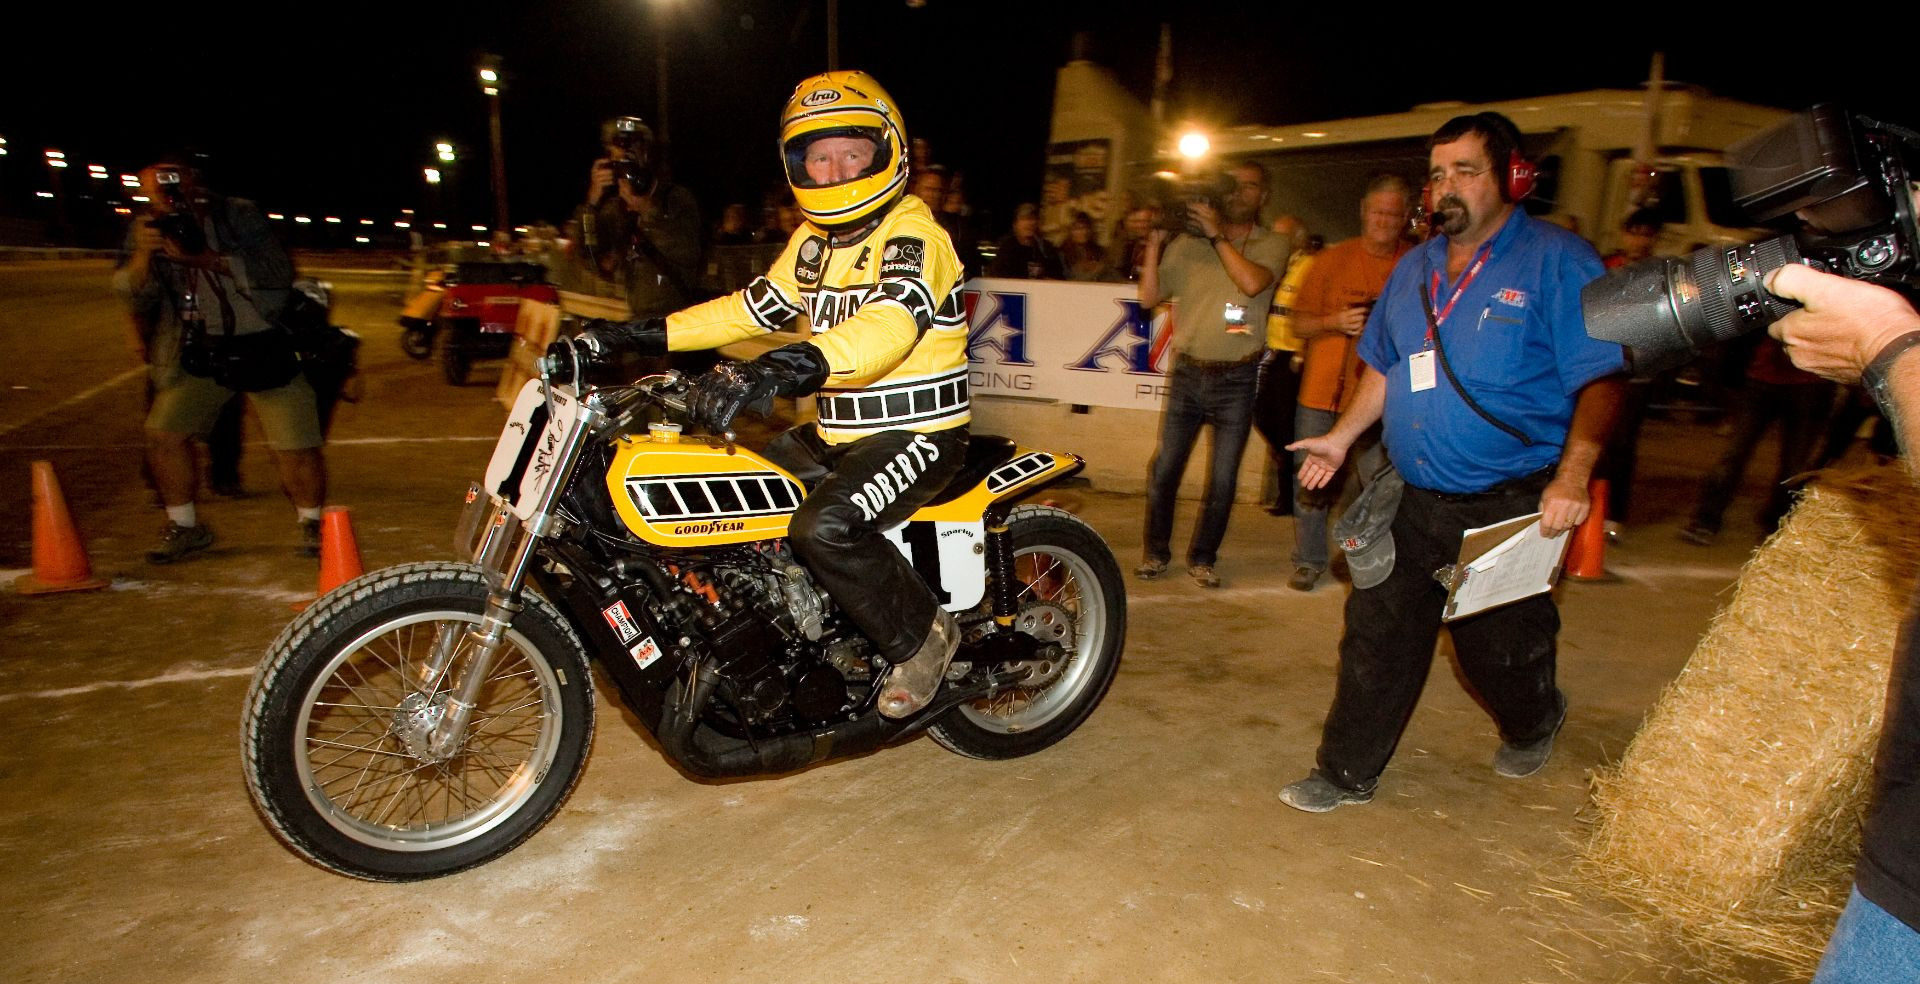 King Kenny Roberts heading out on track at the Indy Mile on a Yamaha TZ750-powered dirt tracker in 2009. Photo courtesy Yamaha.